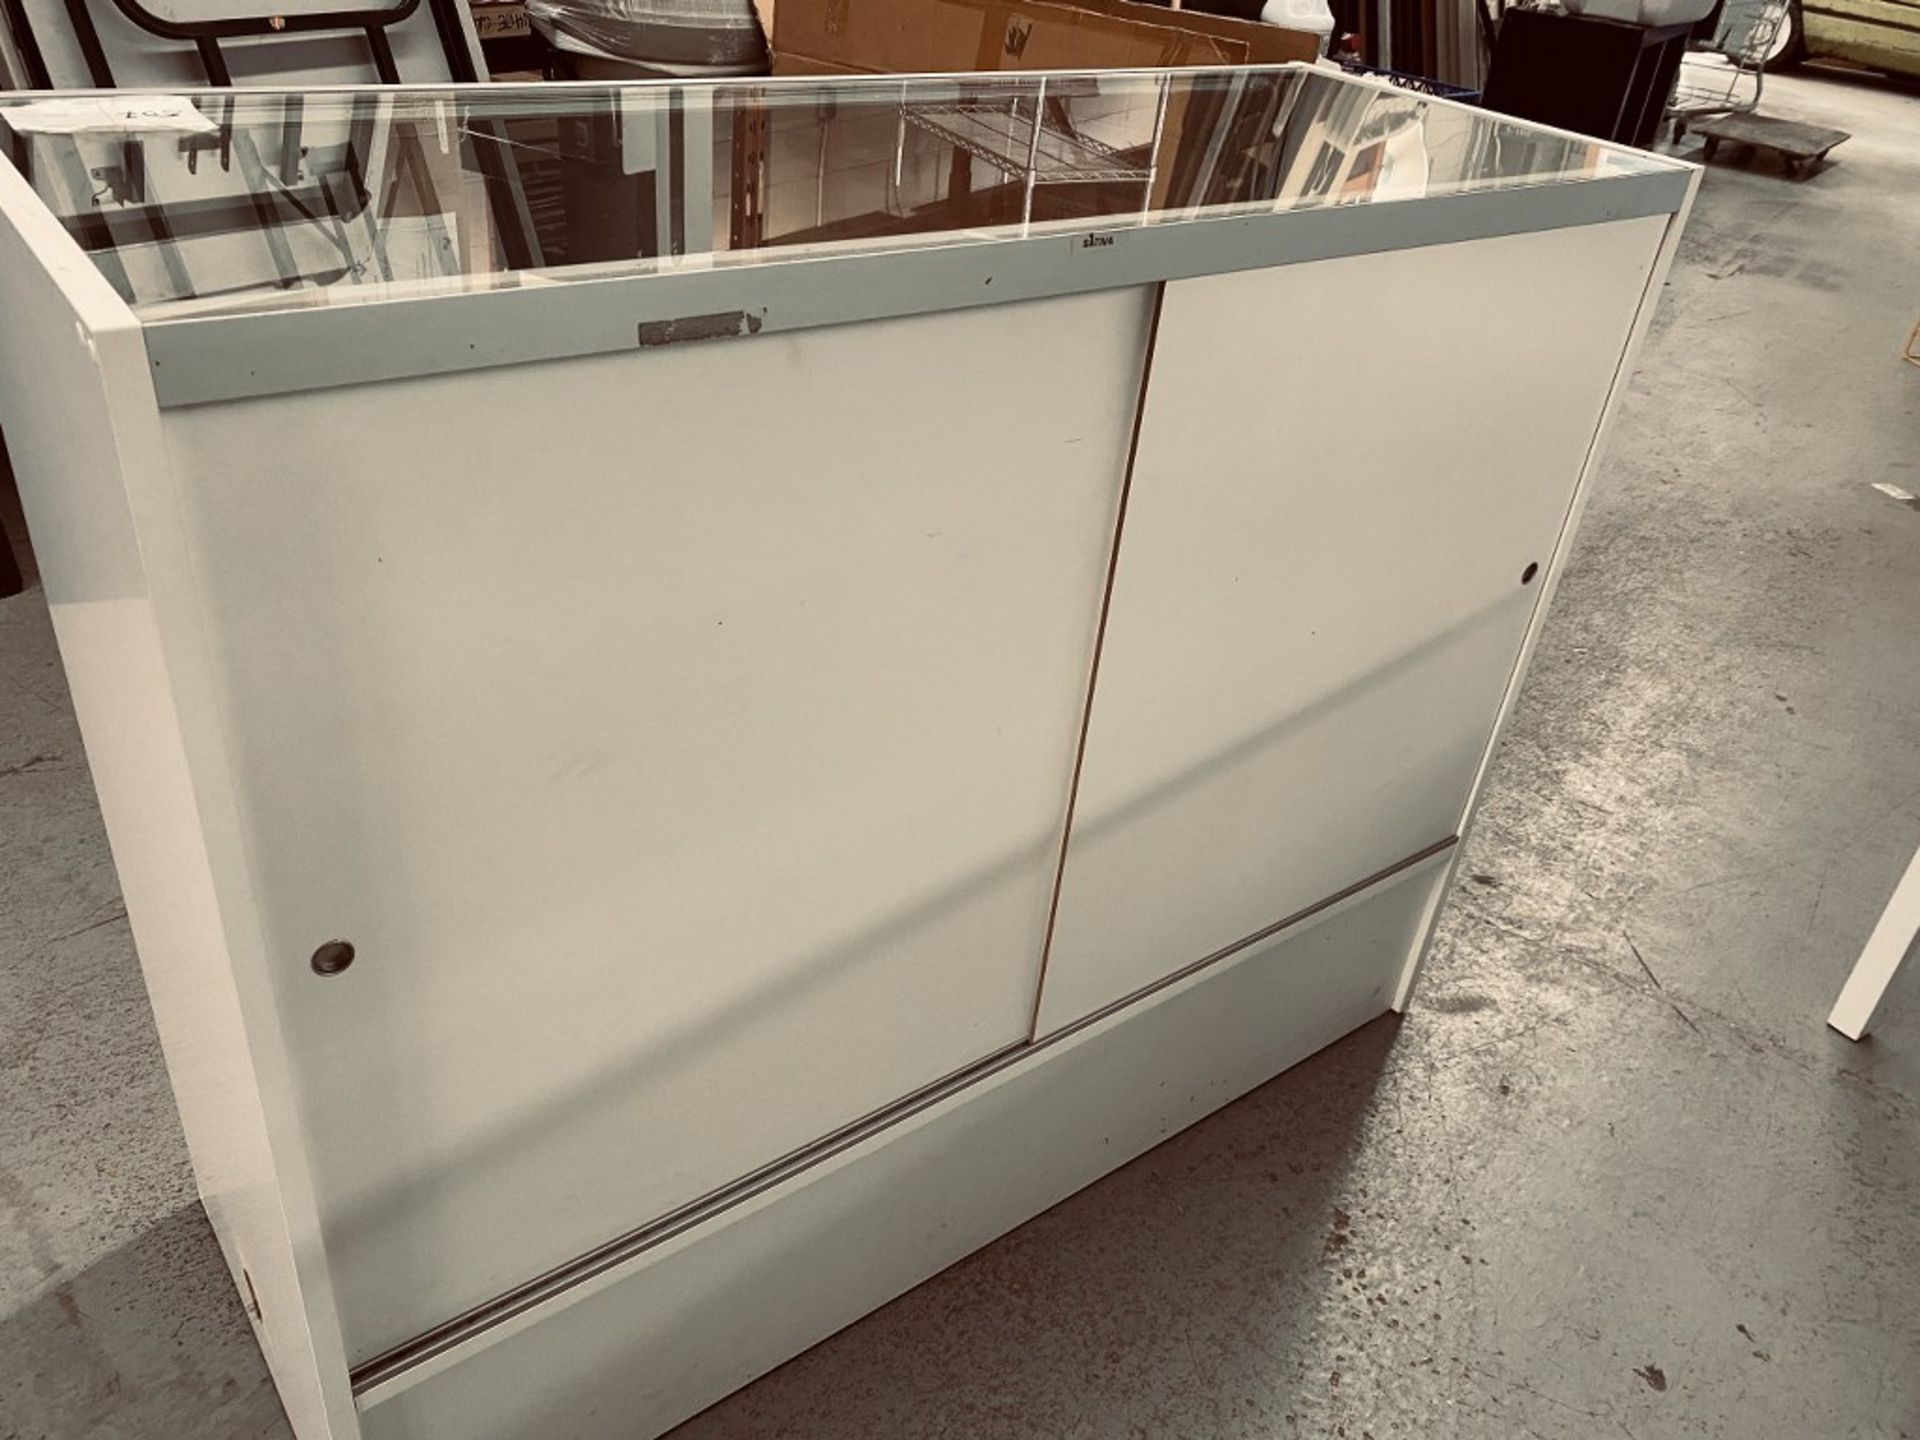 48" X 18" X 38" RETAIL DISPLAY CABINET W/ GLASS & LED LIGHTING - Image 2 of 2